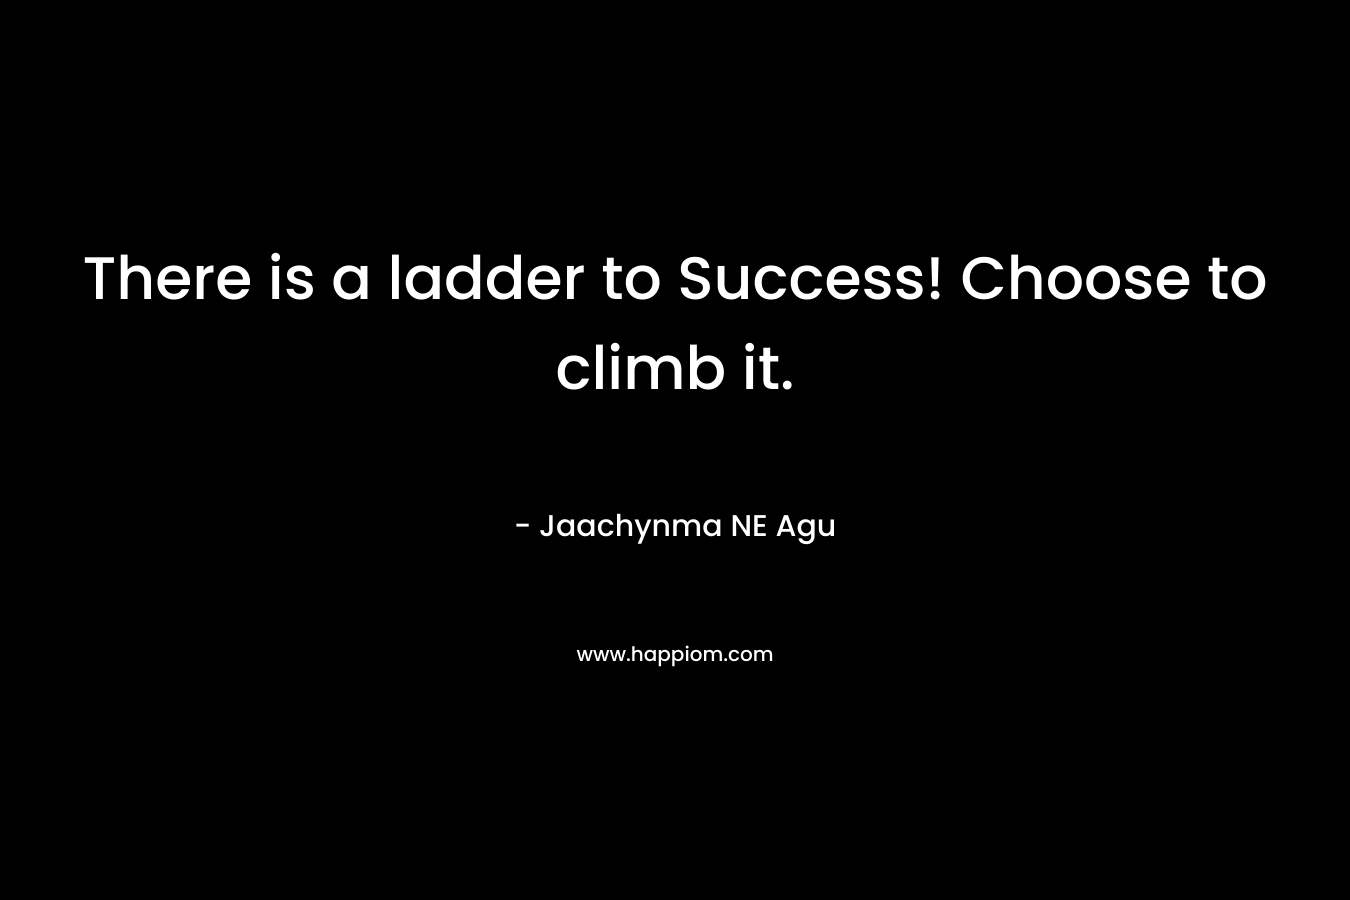 There is a ladder to Success! Choose to climb it.